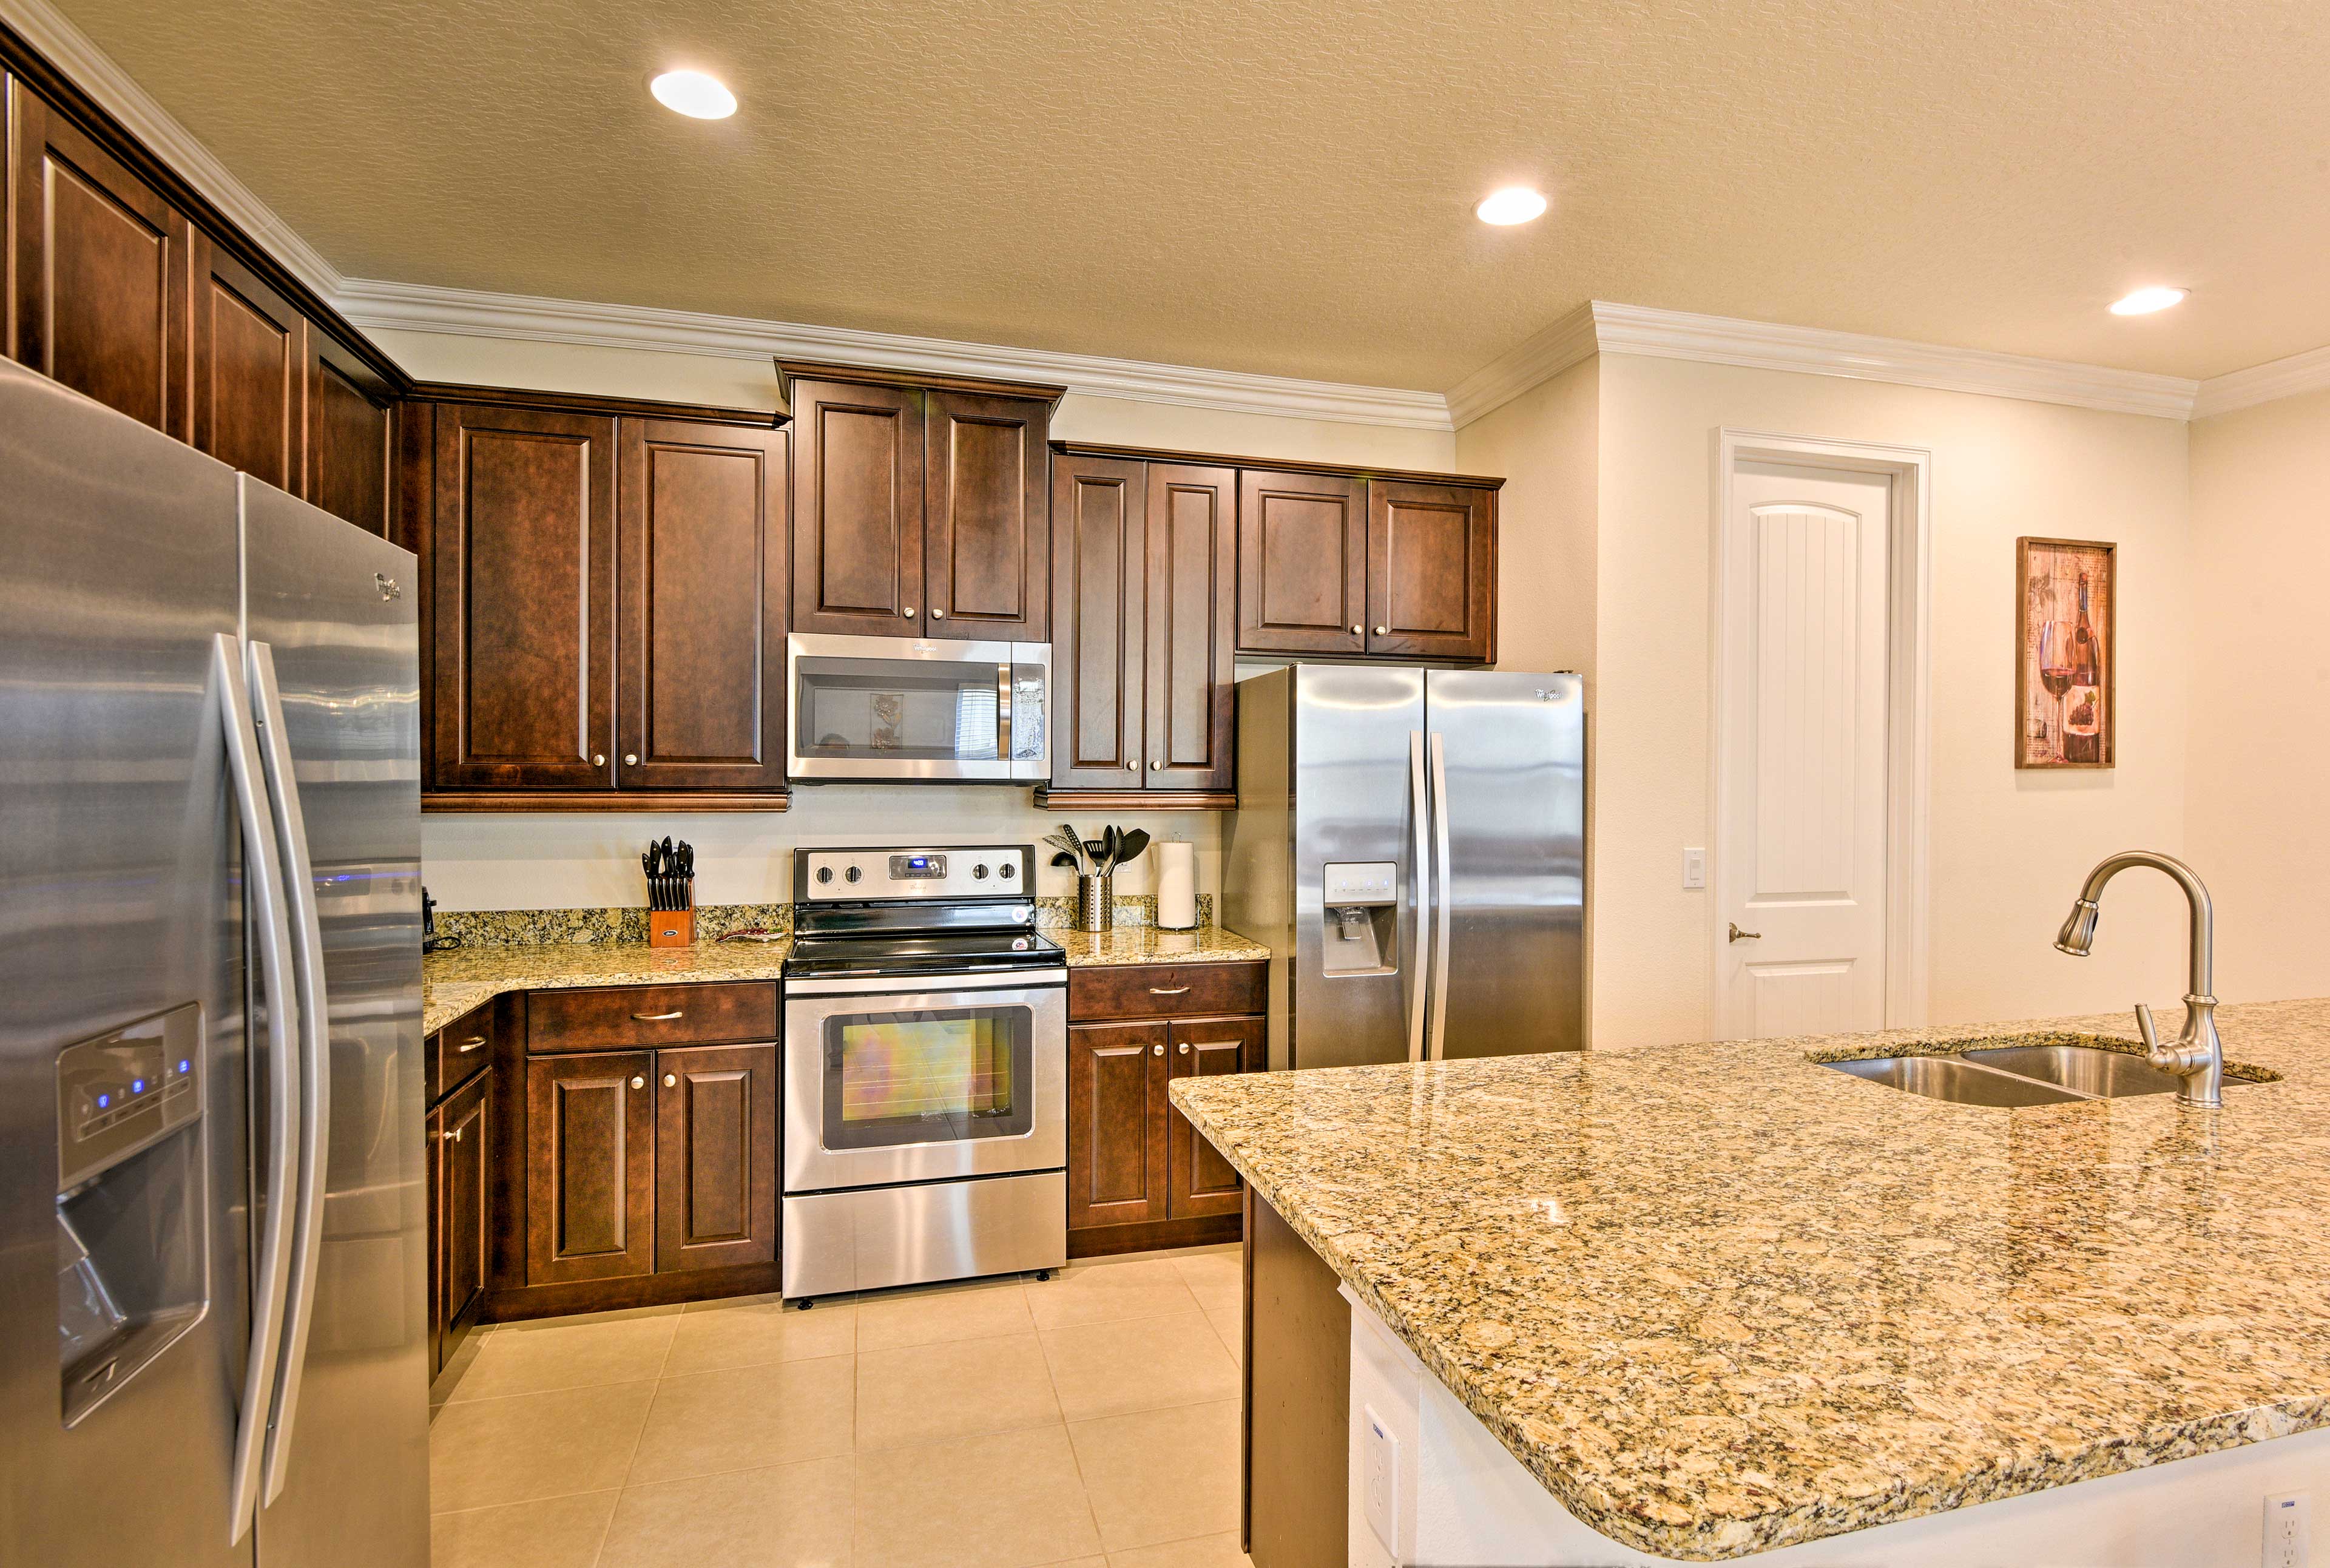 The fully equipped kitchen has stainless steel appliances and granite counters.